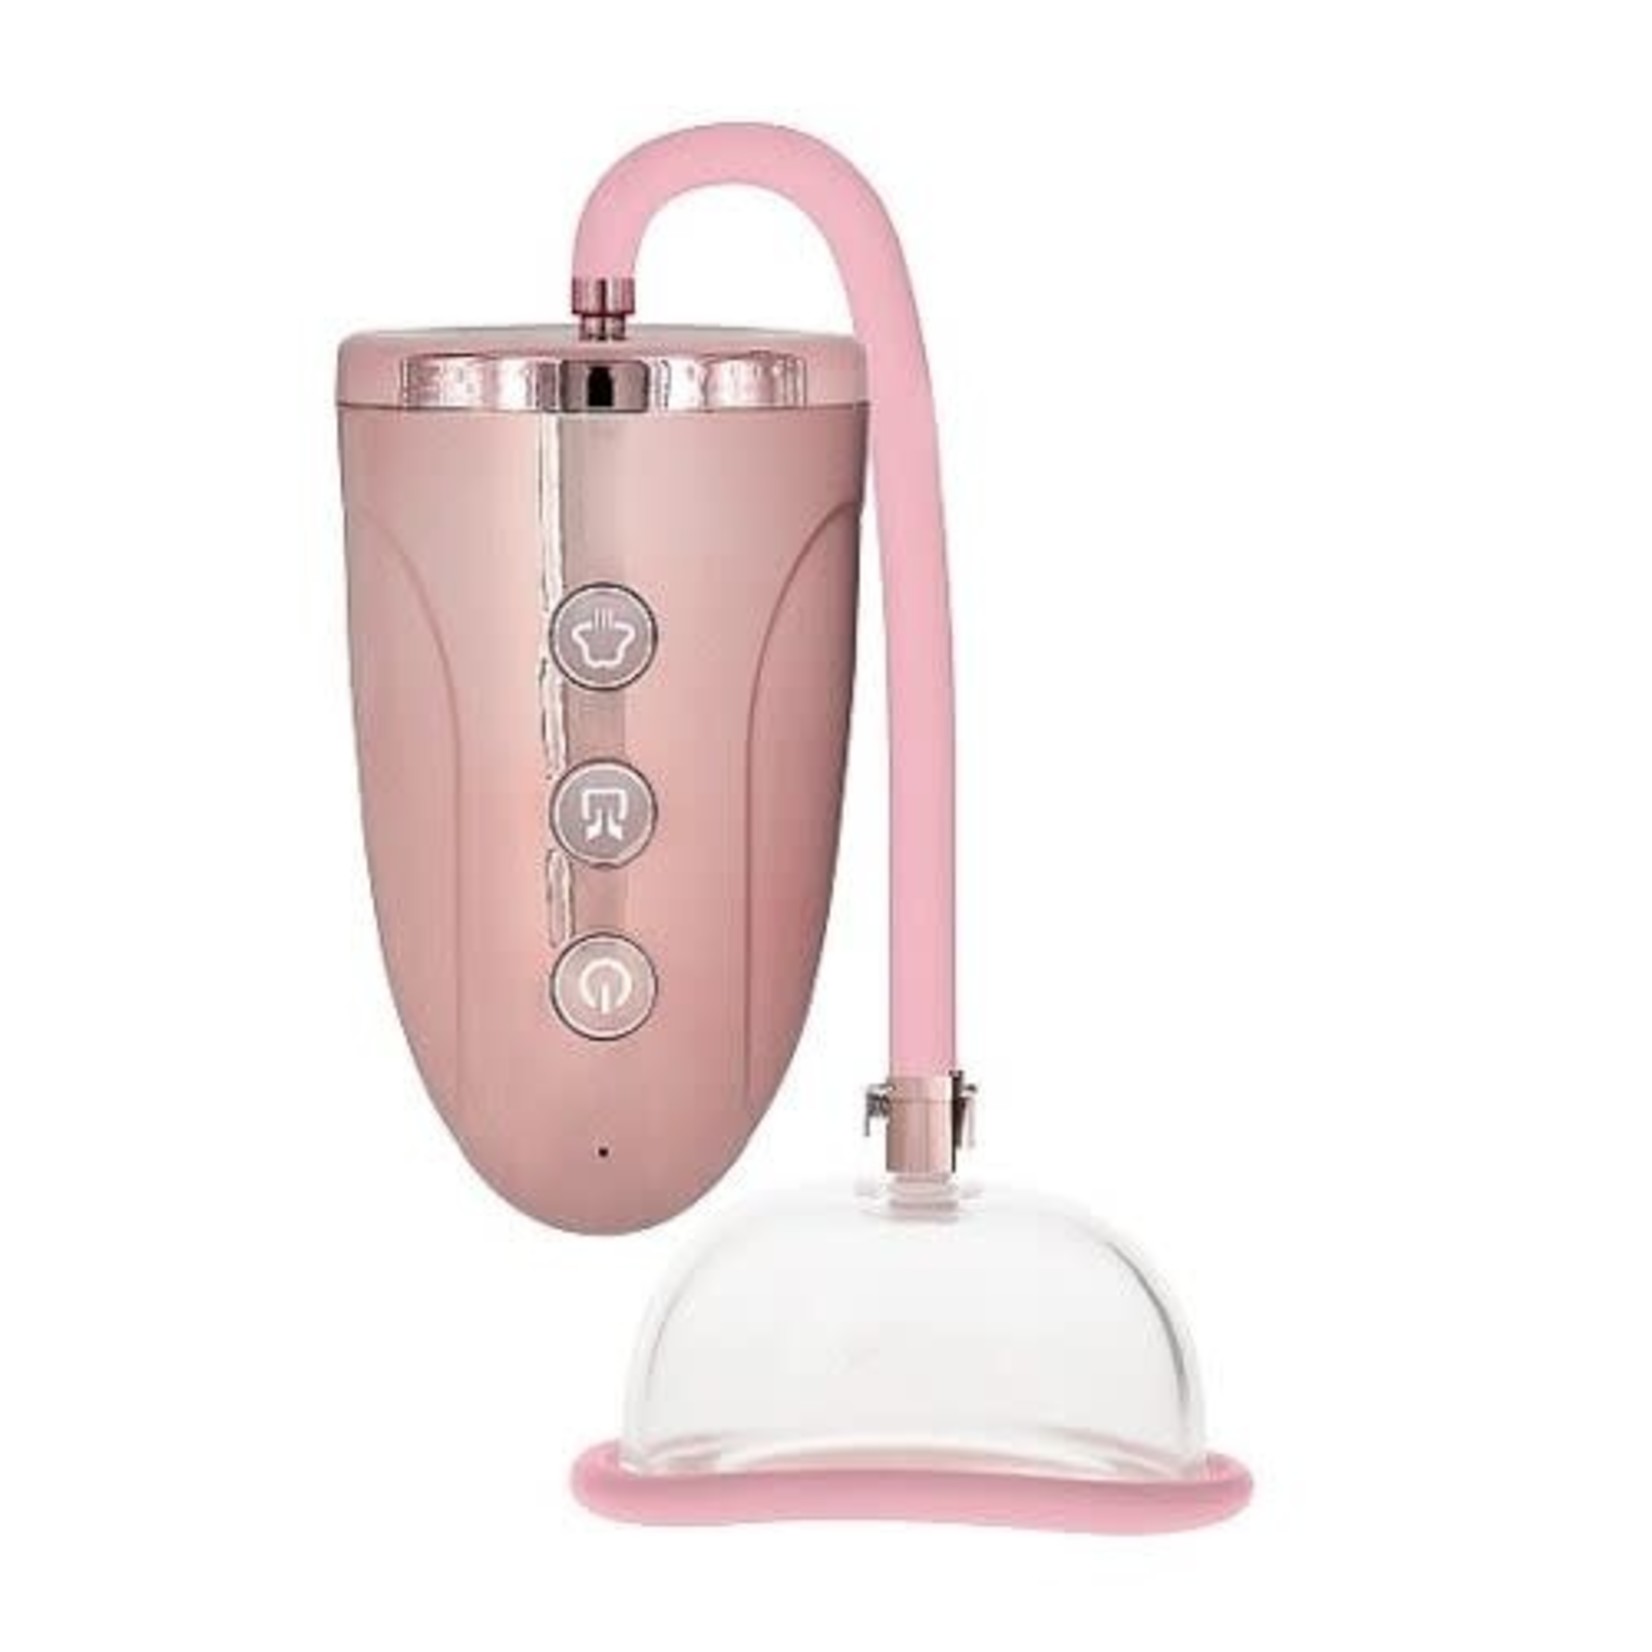 SHOTS PUMPED RECHARGEABLE PUSSY PUMP